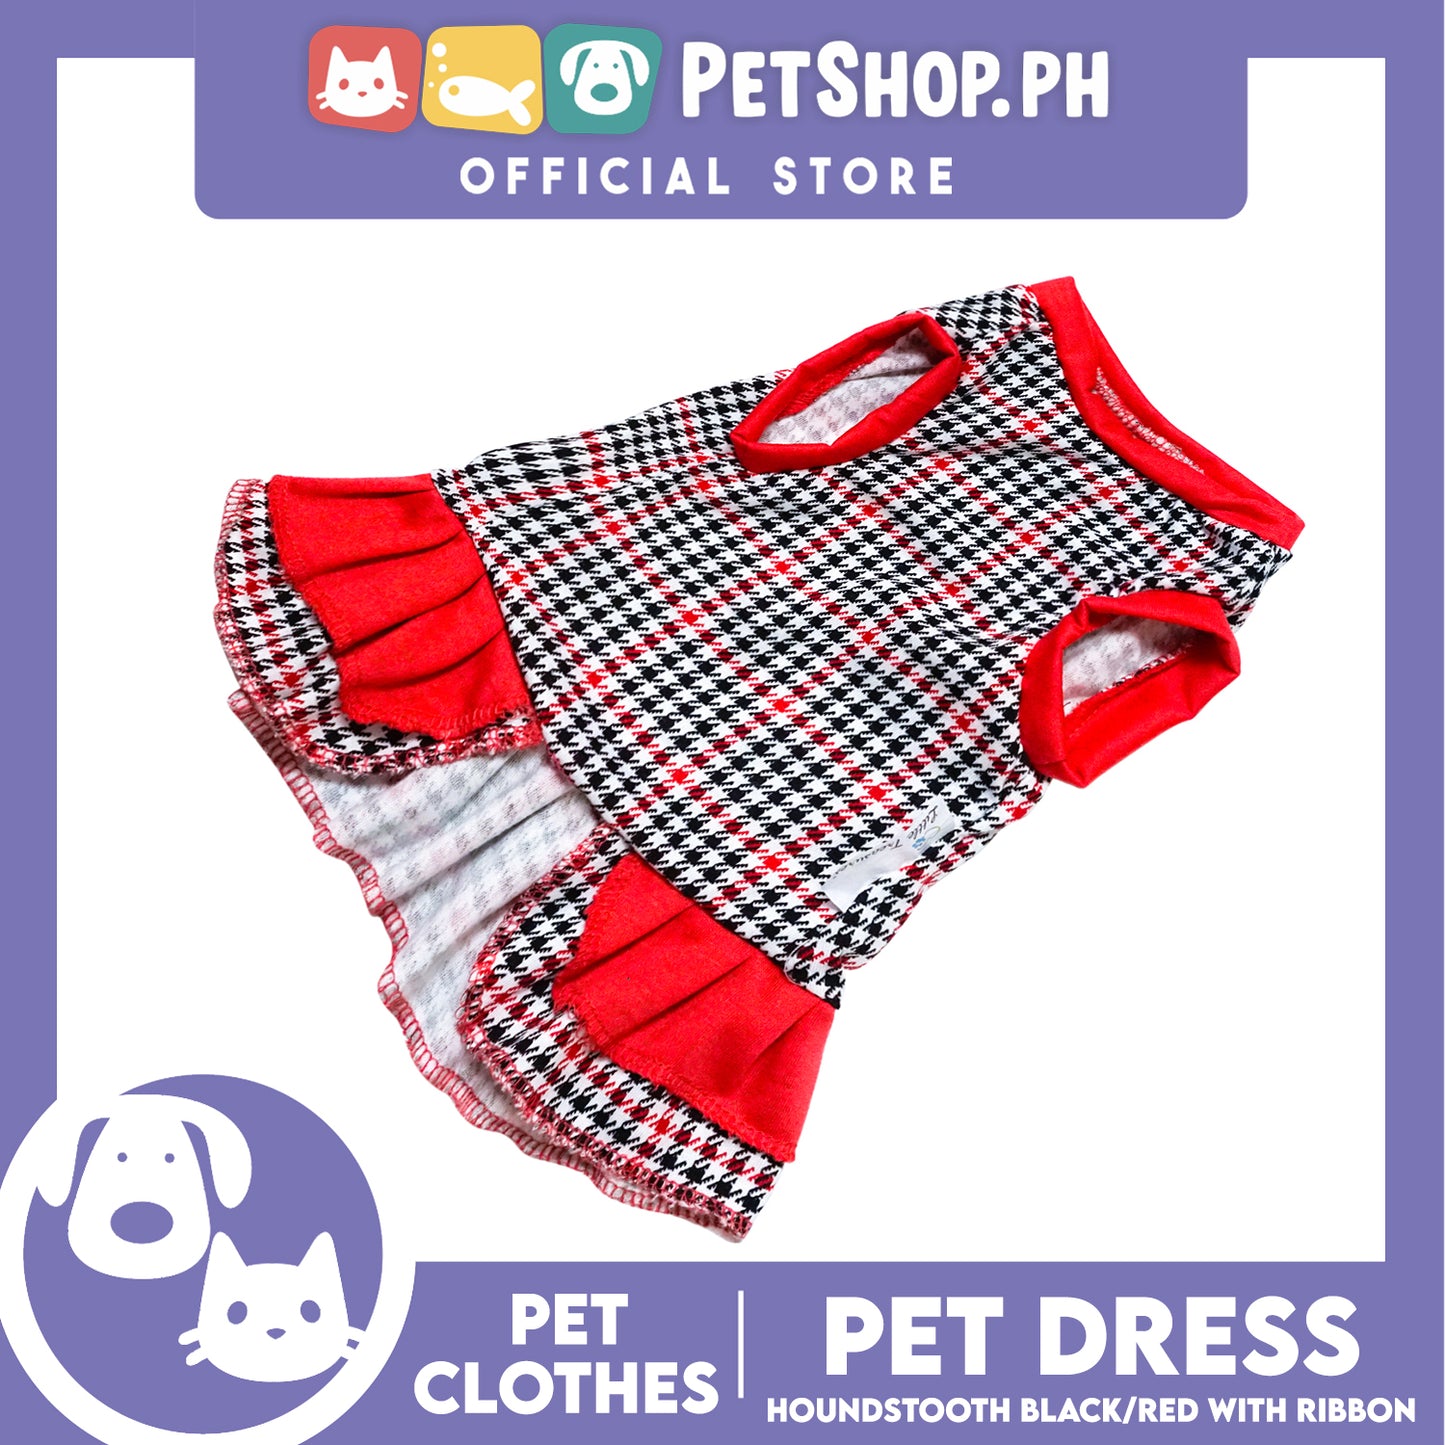 Pet Dress Houndstooth Black/Red with ribbon (Medium) Pet Dress Clothes Perfect for Dogs